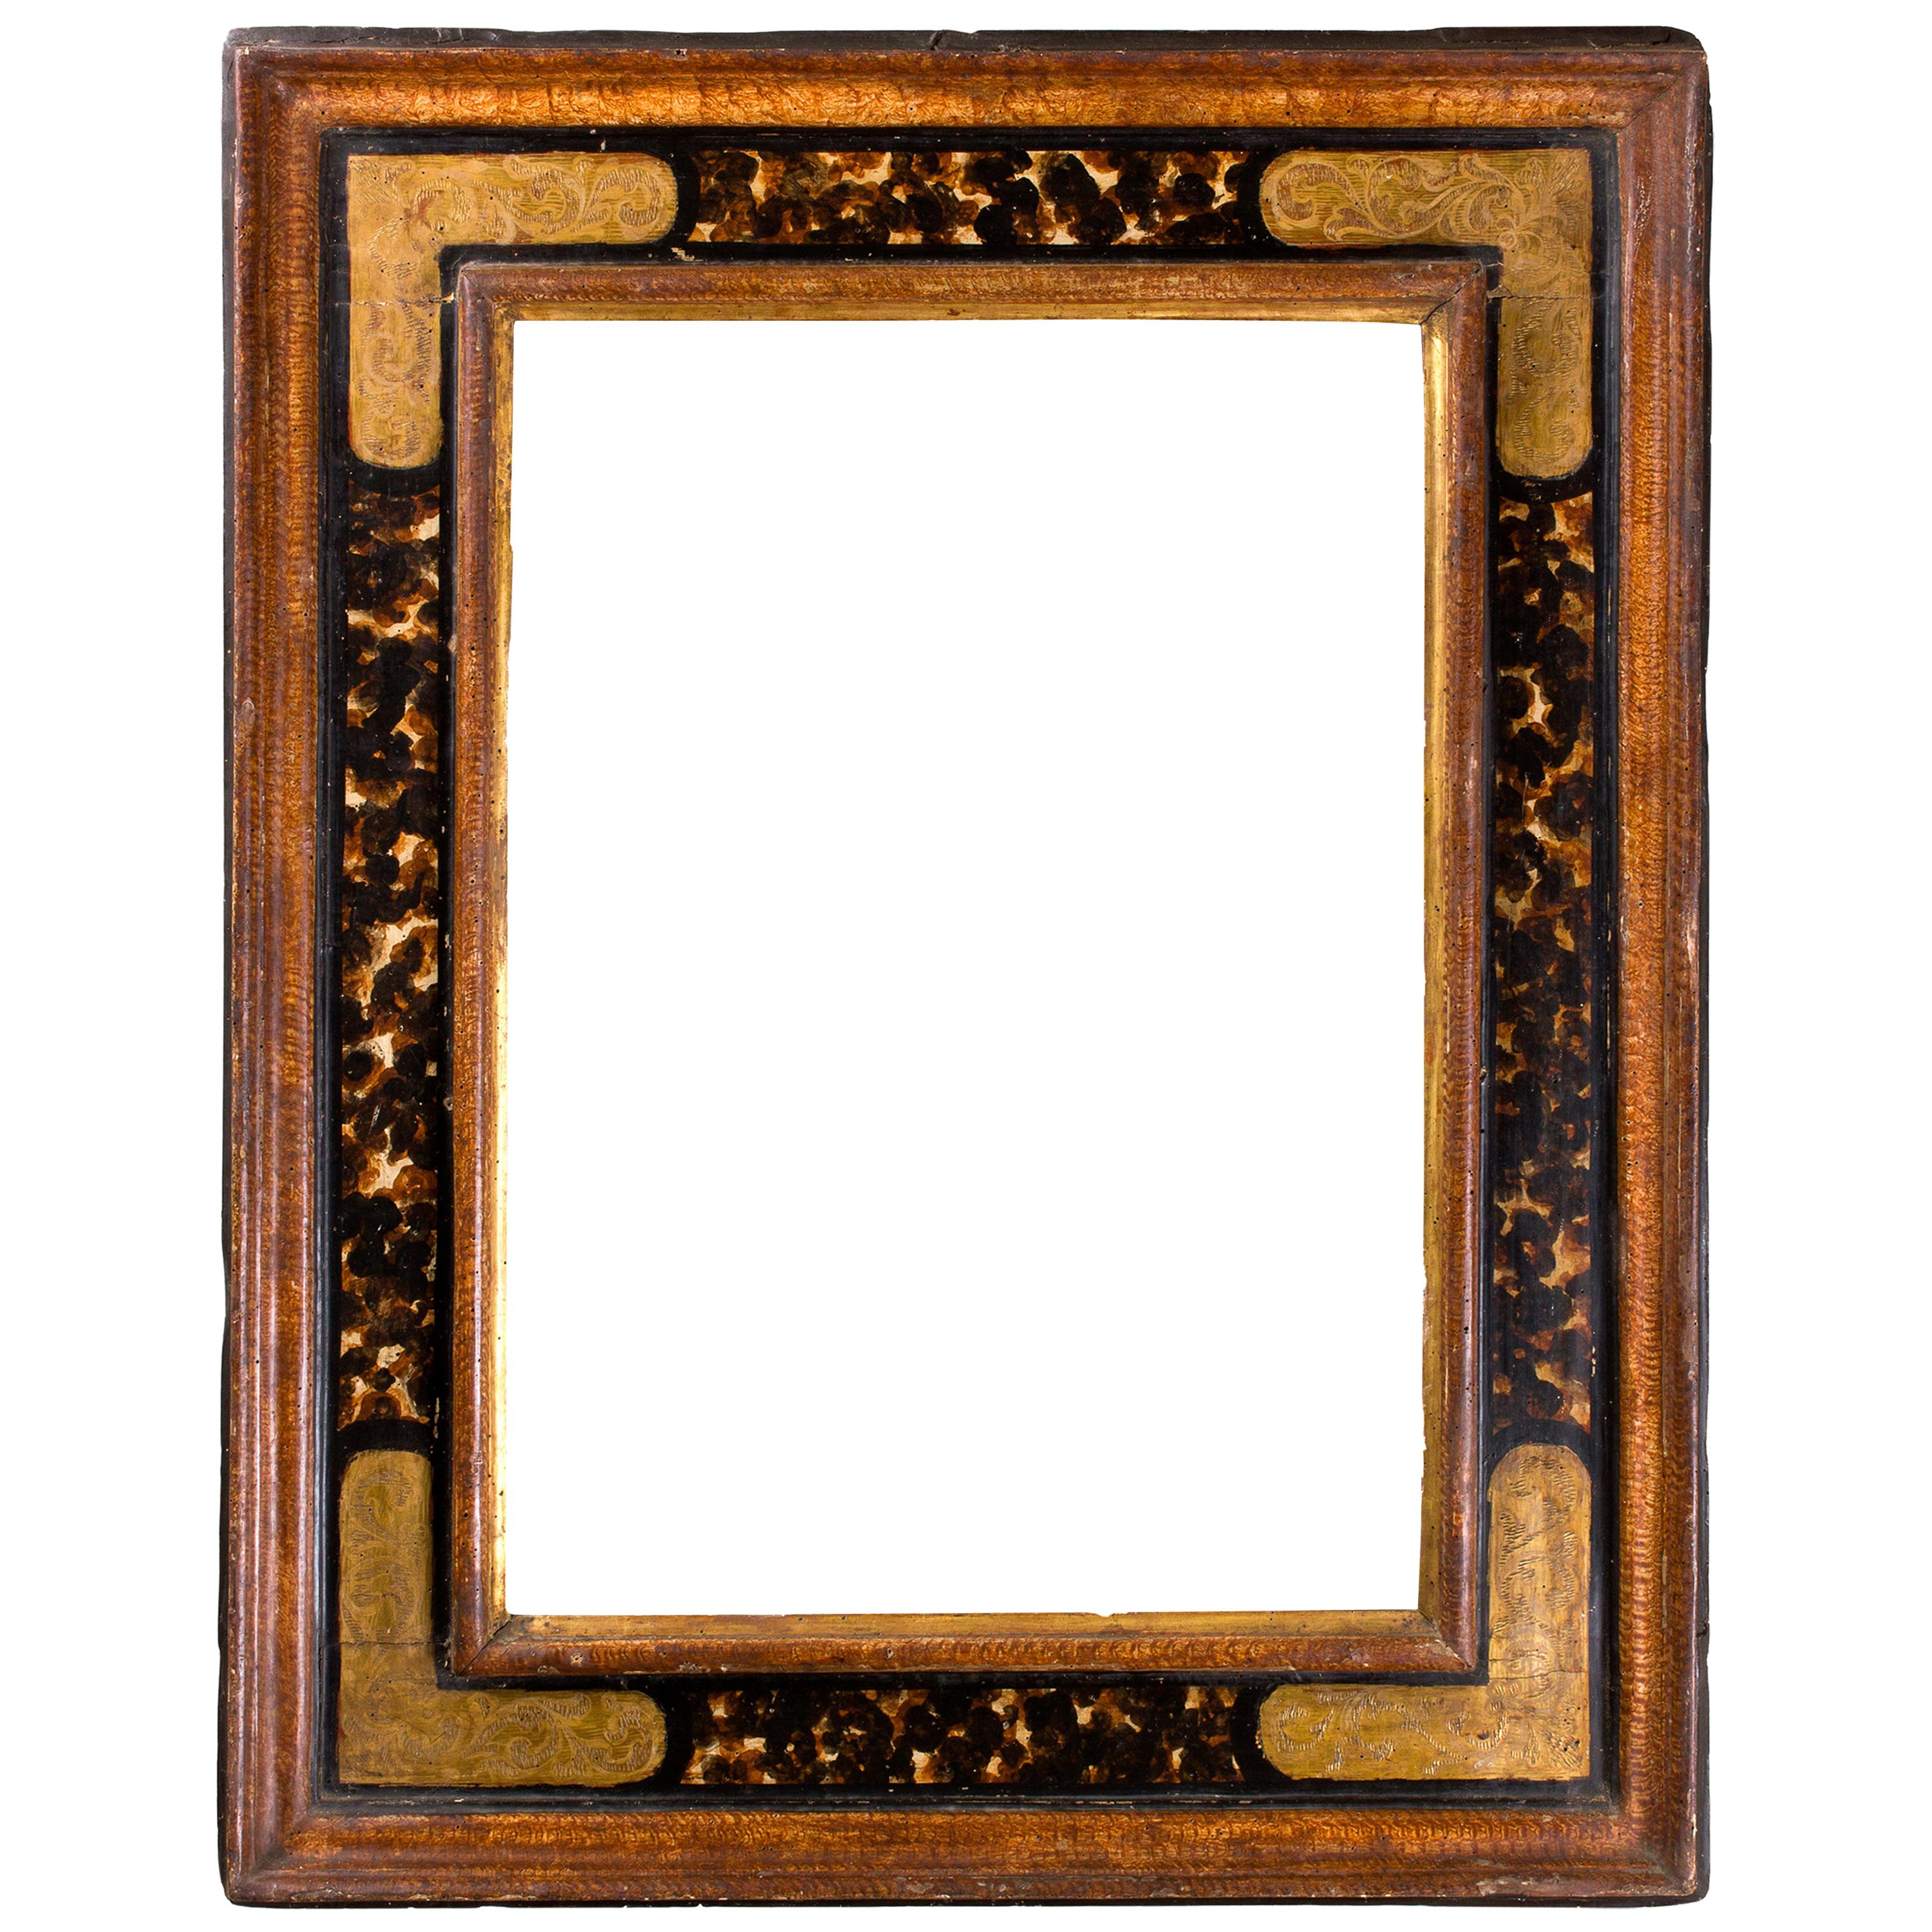 Marche Frame, Italy, End of 16th Century